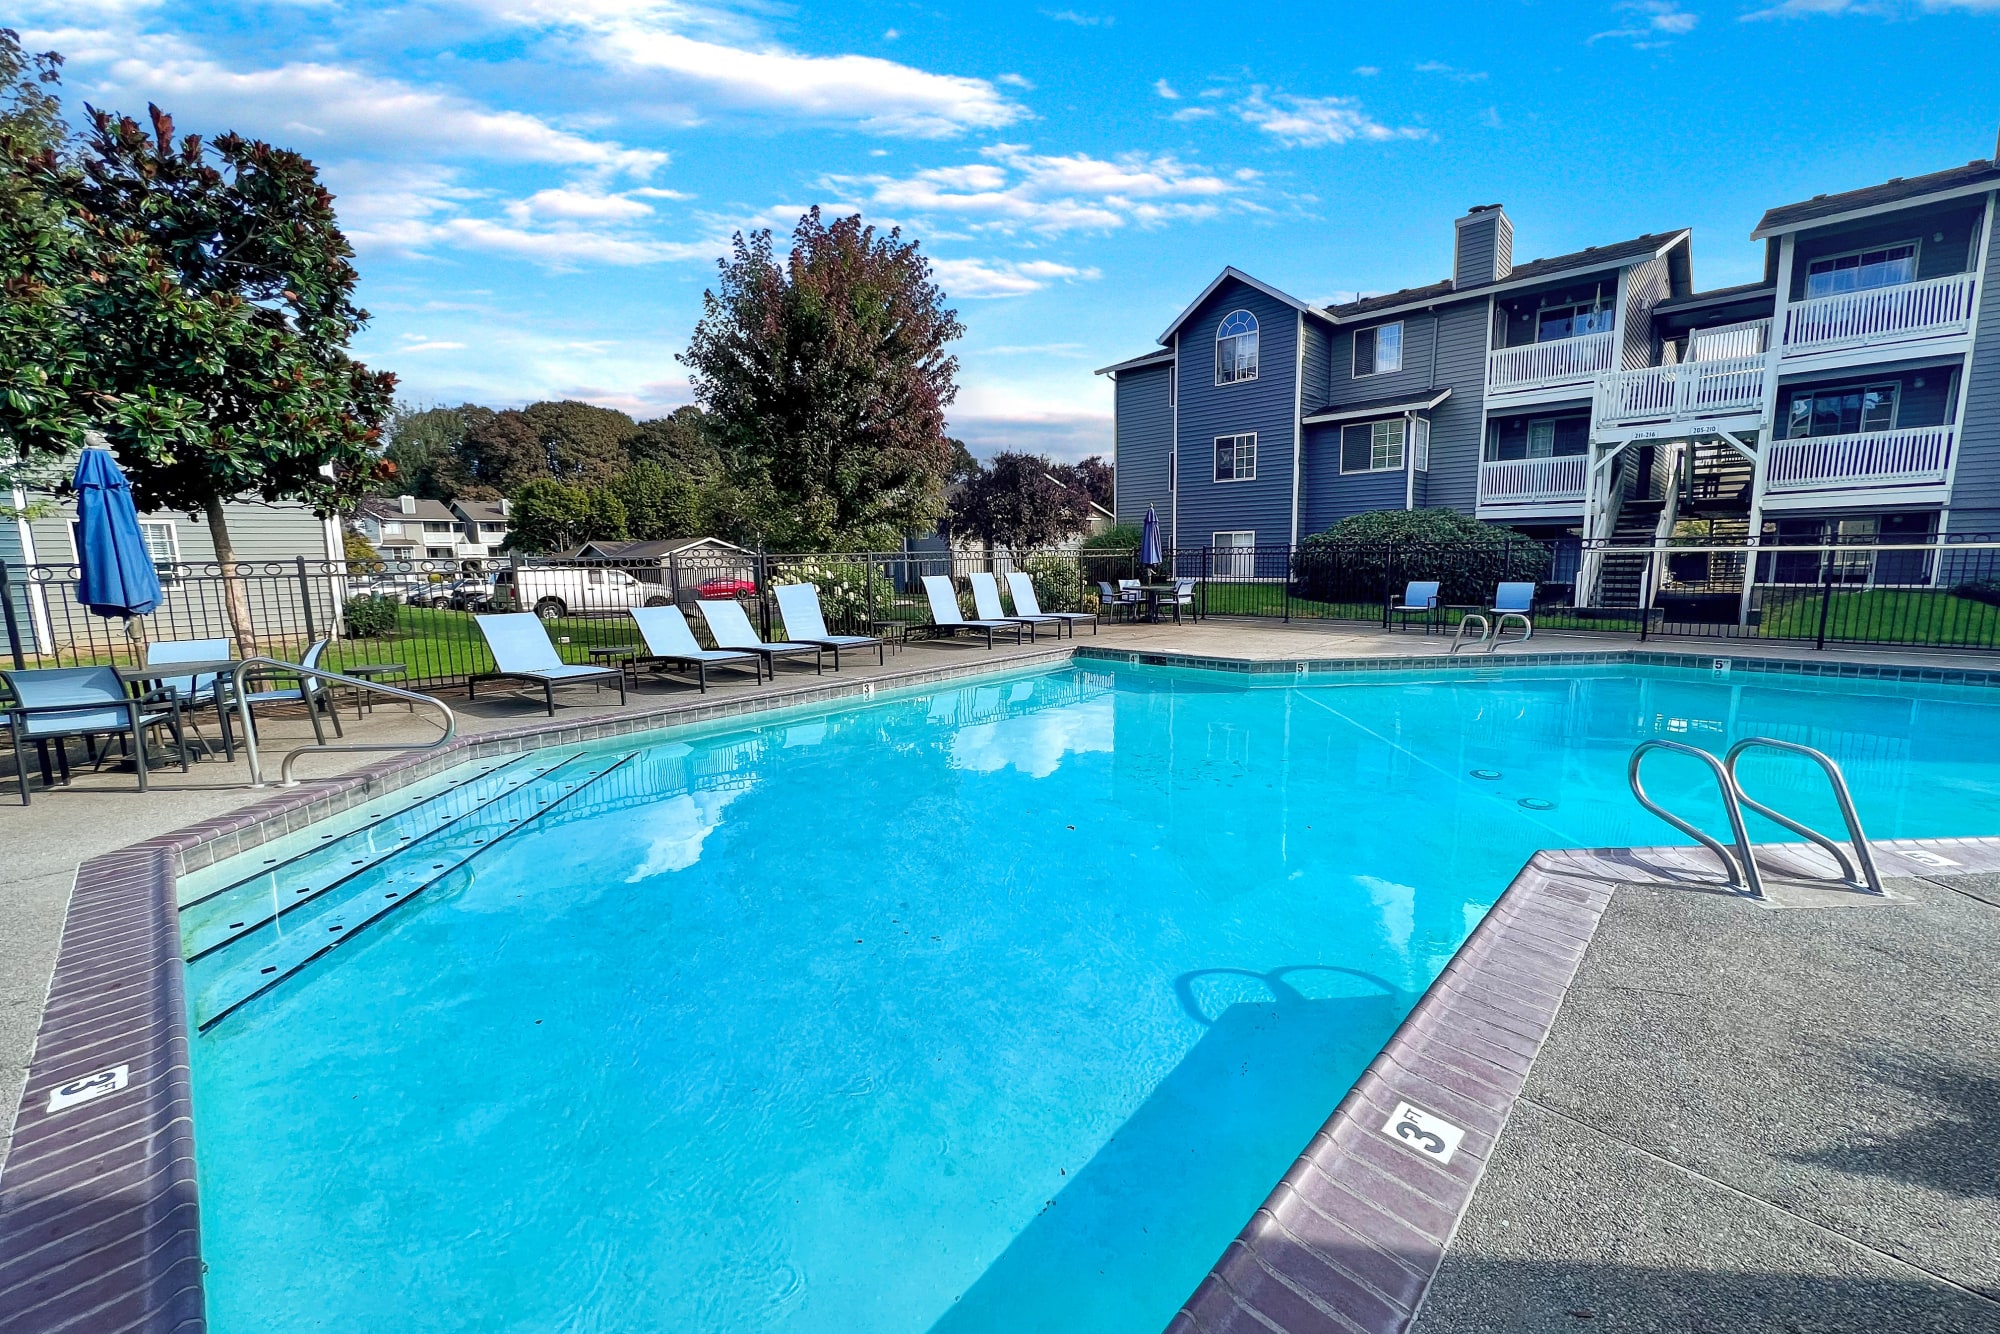 Sparkling pool with new lounge chairs at Walnut Grove Landing Apartments in Vancouver, Washington